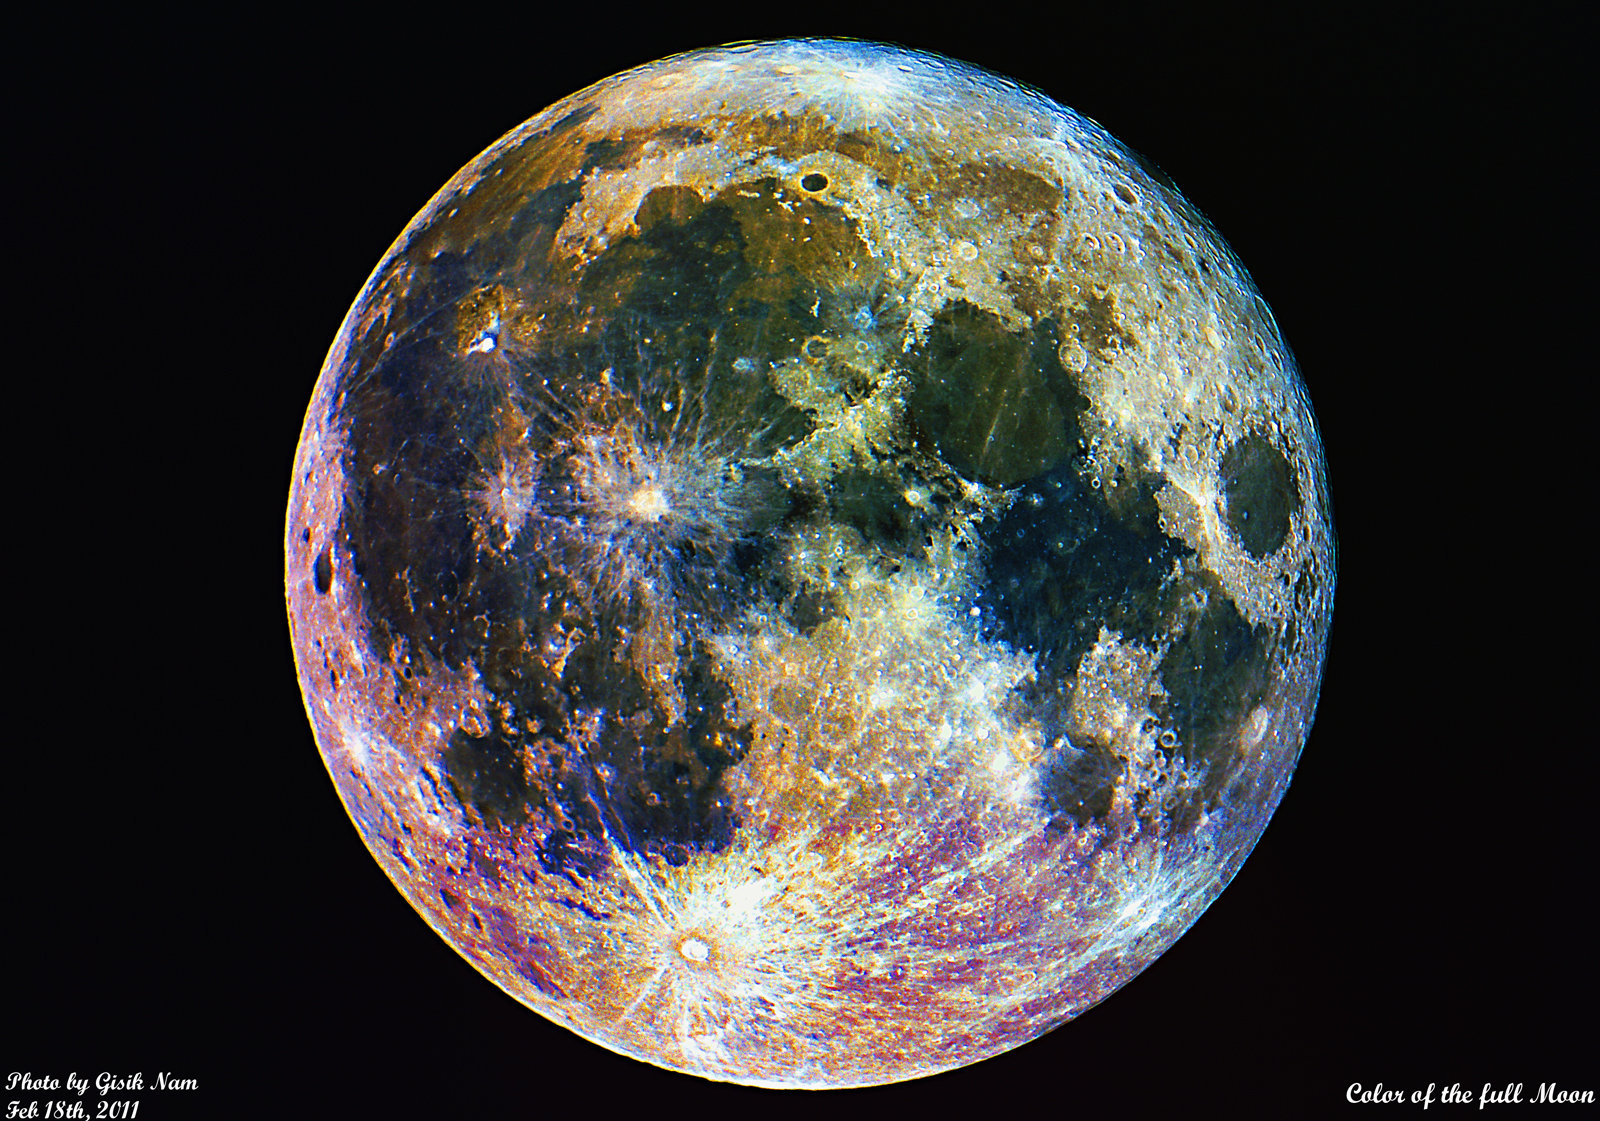 color_of_the_full_moon.jpg : Color of the full Moon